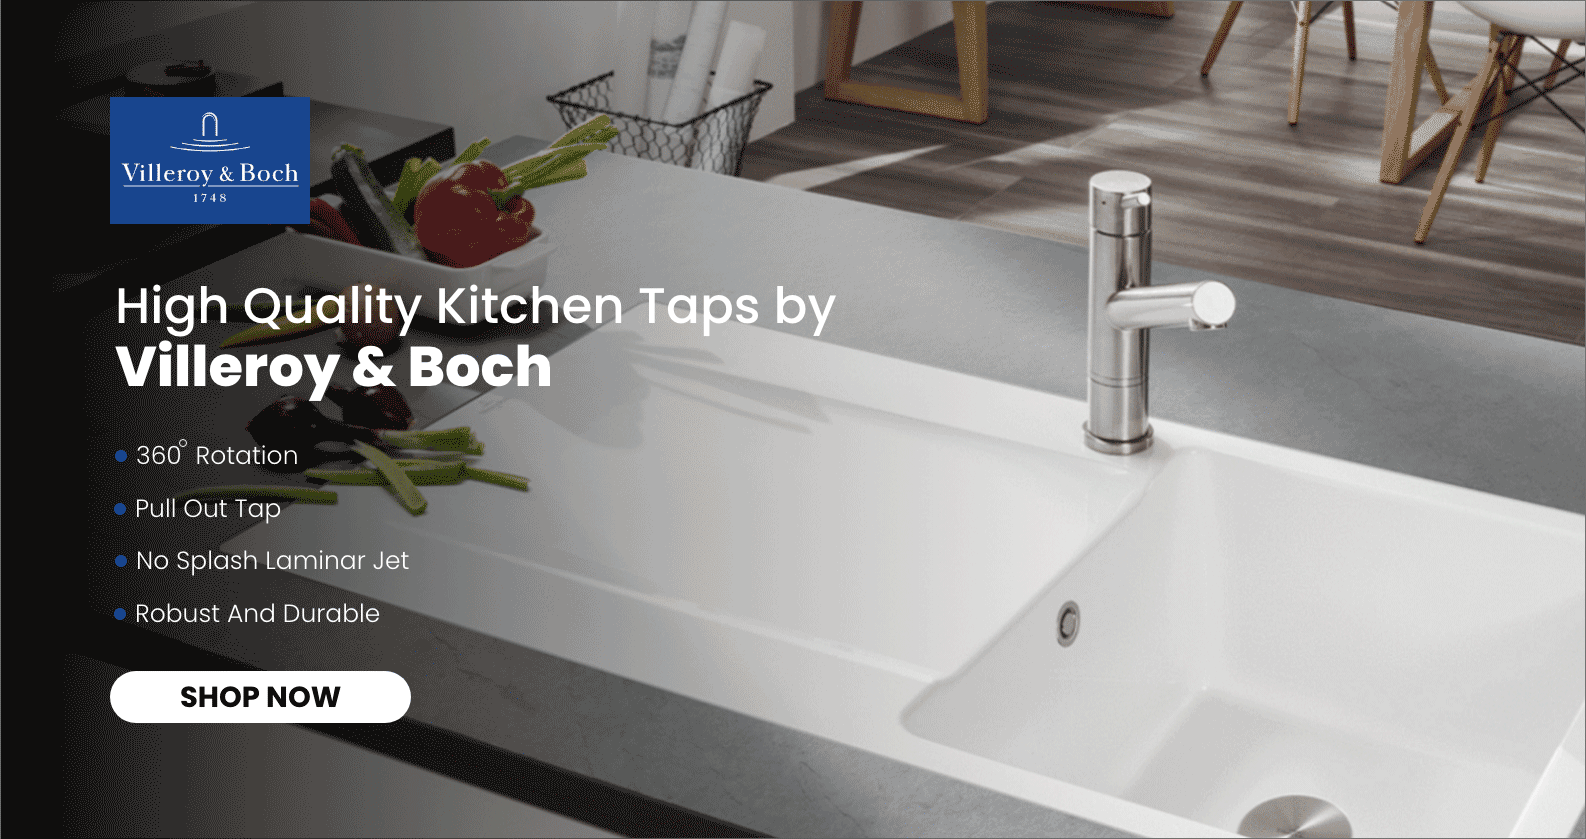 Discover Villeroy & Boch Kitchen Taps at xTWOstore